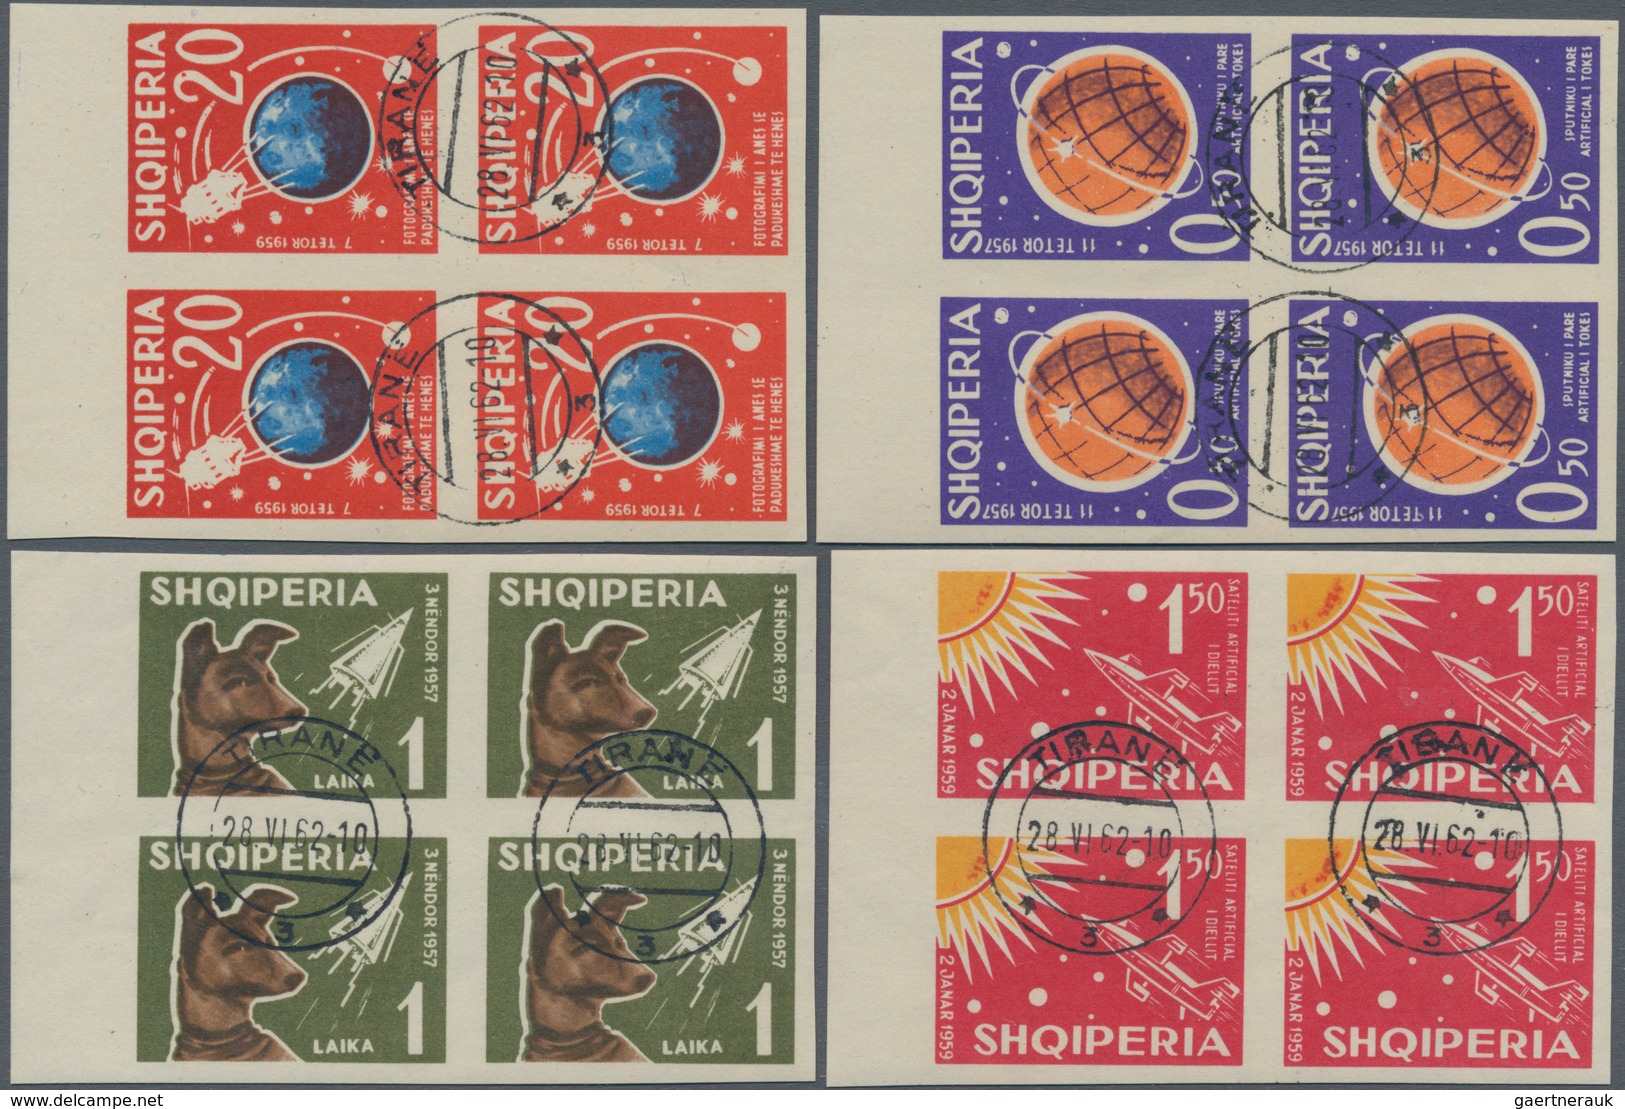 Albanien: 1962, Space Research Imperforate, Complete Set In Marginal Blocks Of Four, Neatly Canceled - Albania